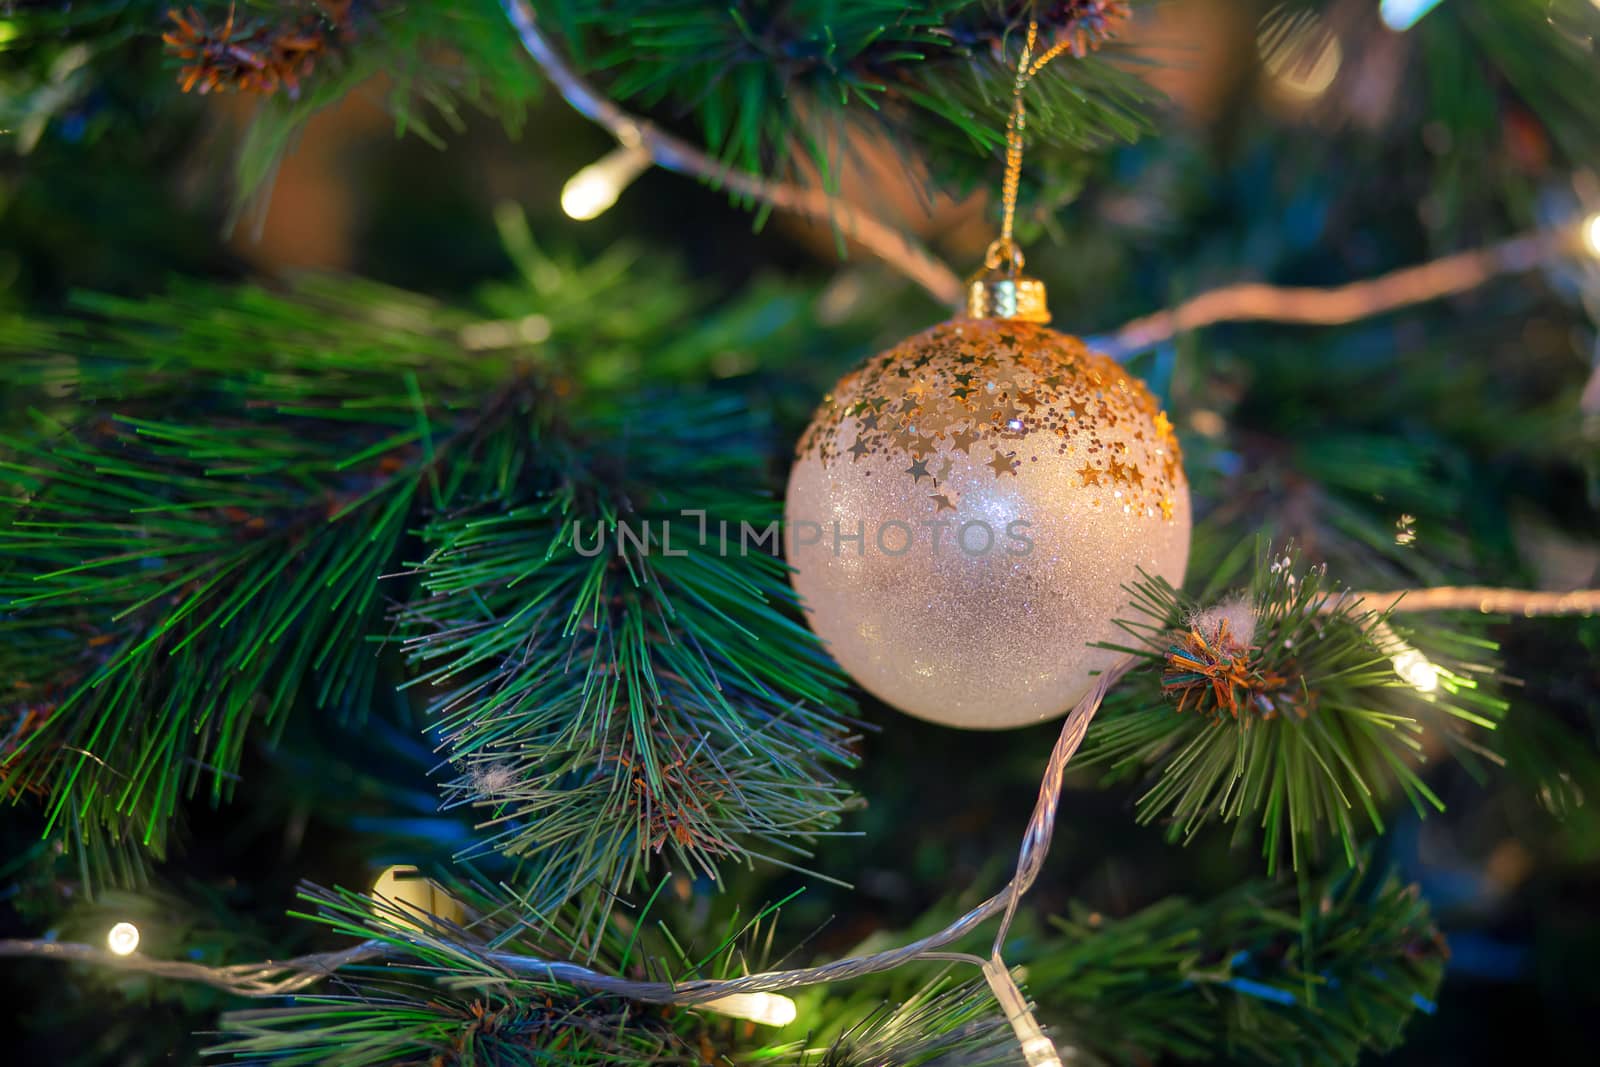 golden ball hanging on a branch of a christmas tree. Christmas tree decoration. Preparing for the holiday, garland